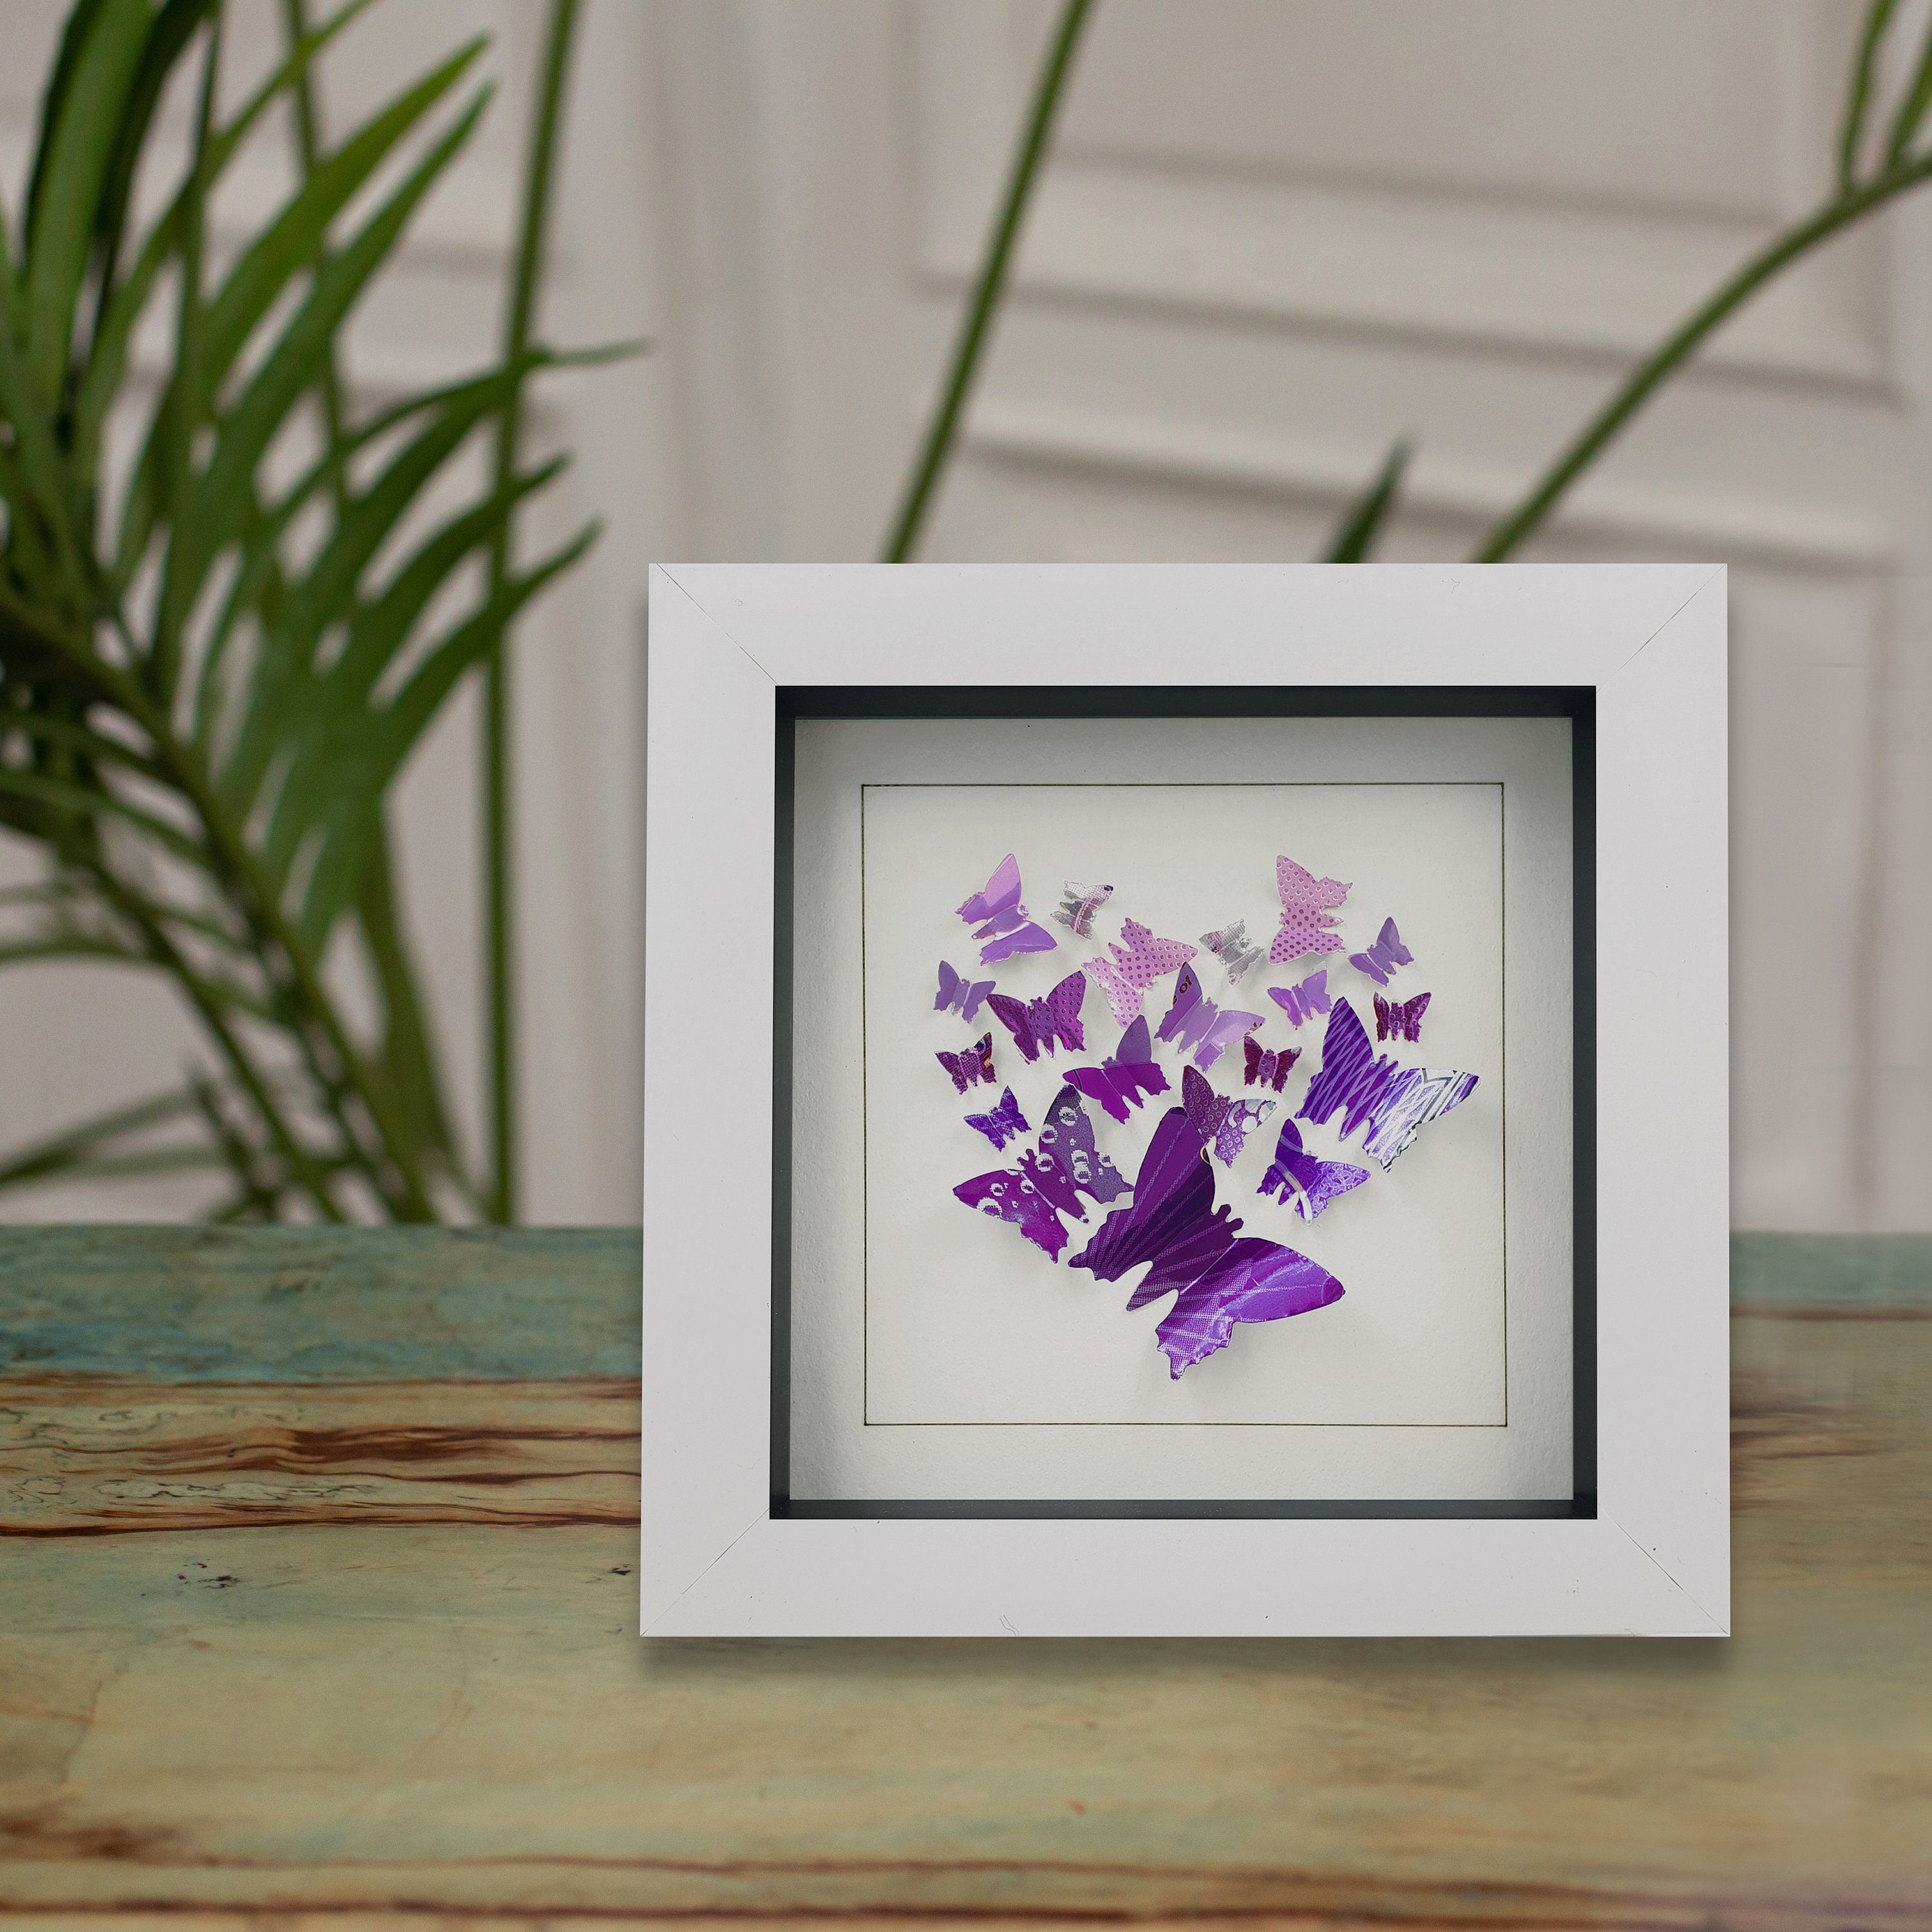 Silver and Purple Photo Picture Frame with Flowers and Butterfly 7x5 inches 